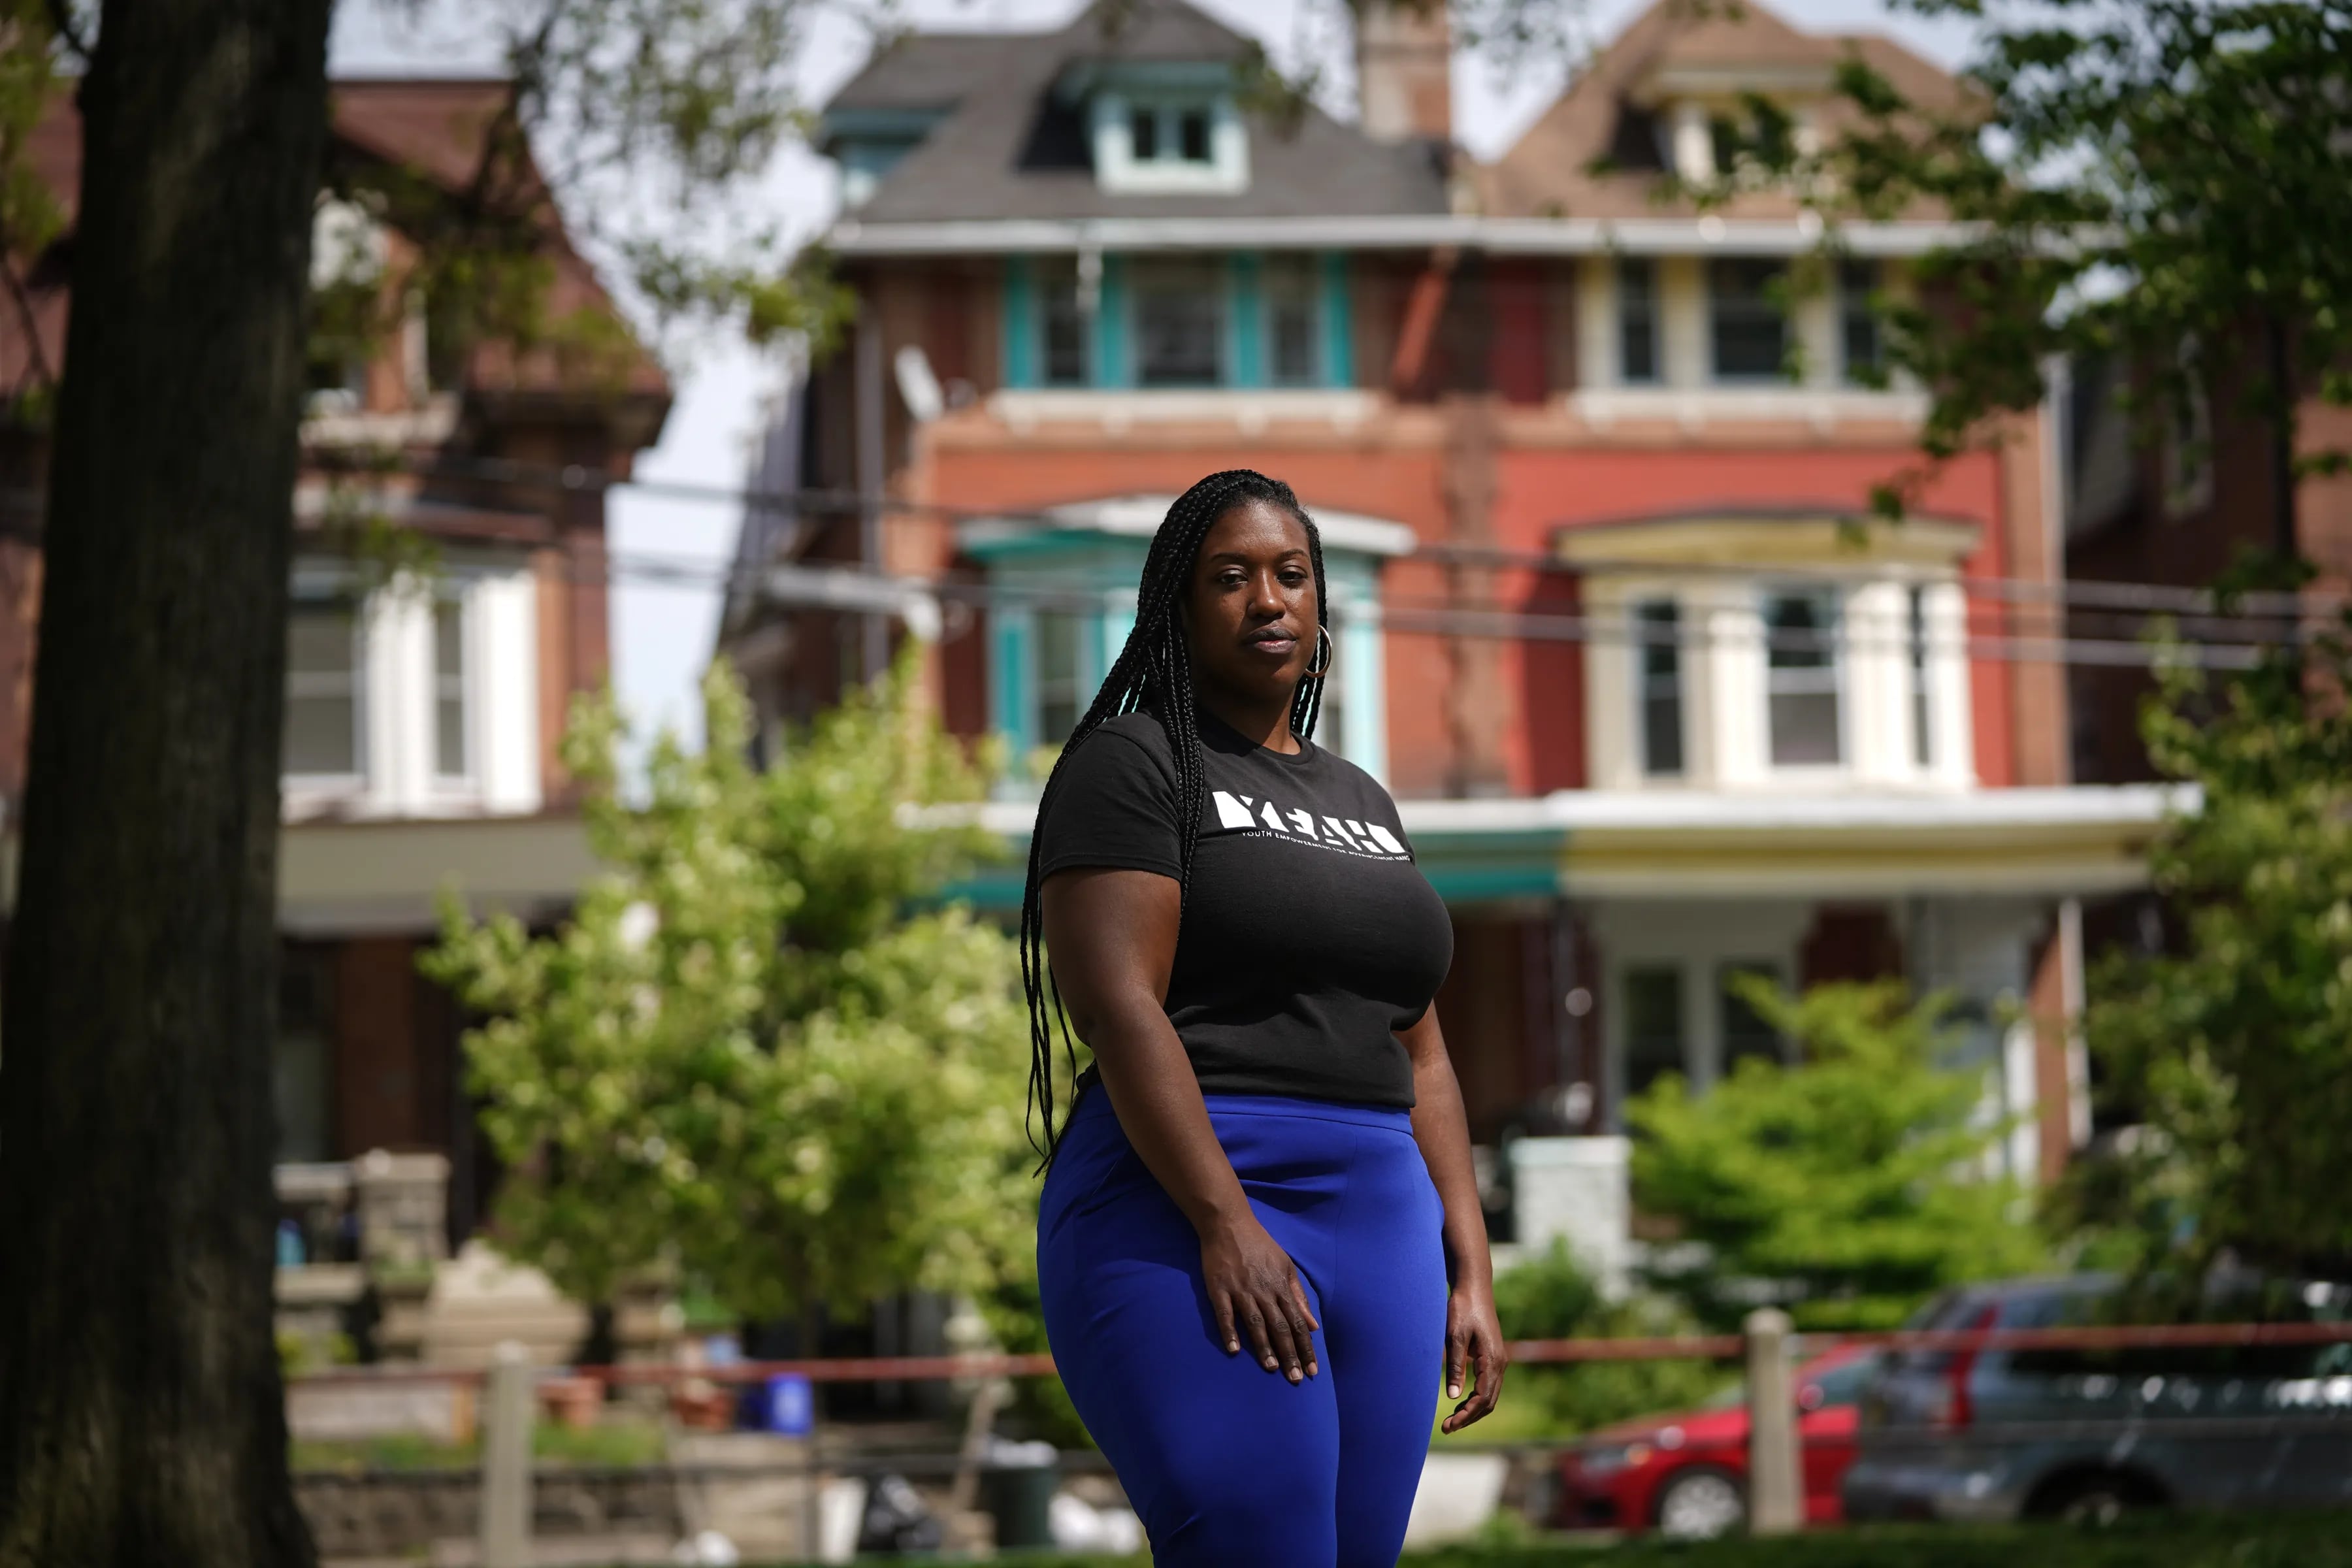 Kendra Van de Water, executive director of the nonprofit YEAH Philly, is seen at Malcolm X Park in West Philadelphia. In her view, the city needs to invest more resources to support kids' success in the community, instead of being shipped to placements.